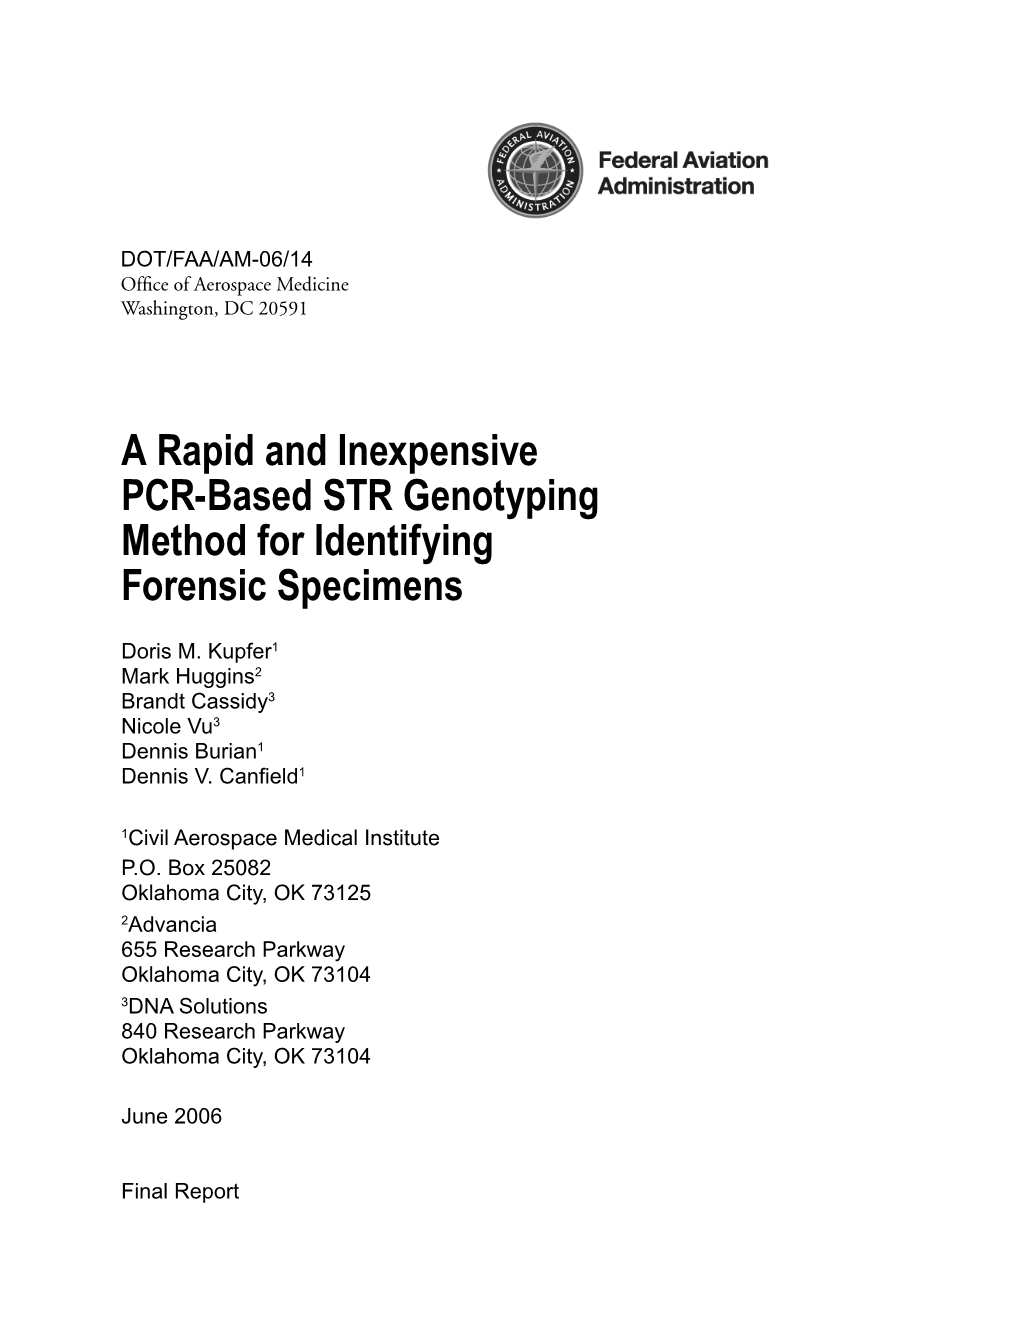 A Rapid and Inexpensive PCR-Based STR Genotyping Method for Identifying Forensic Specimens